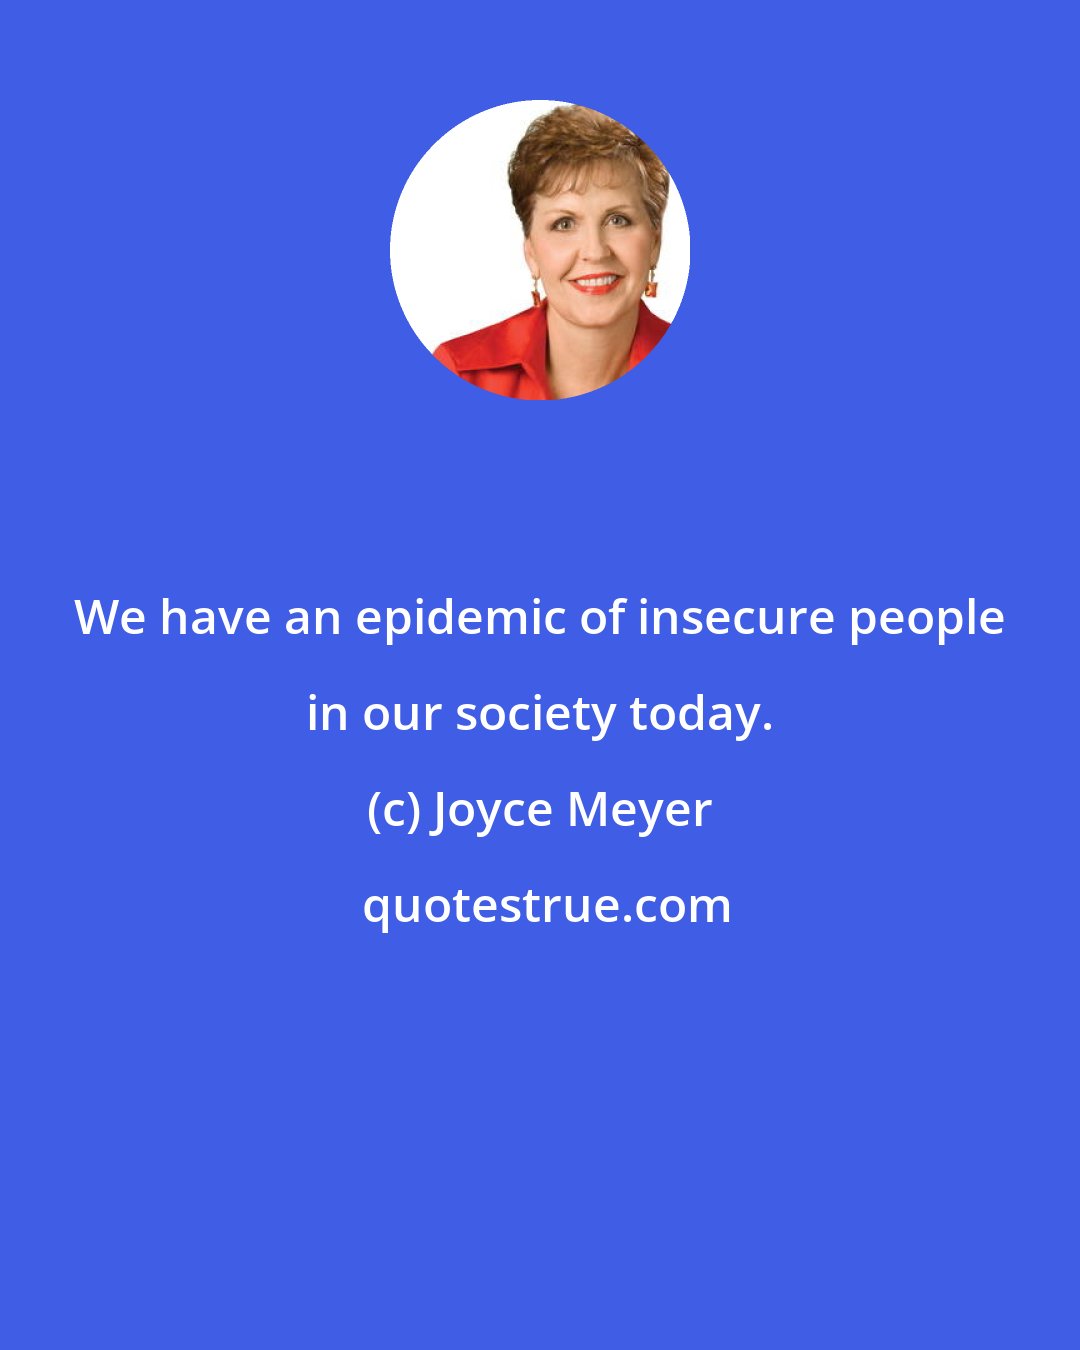 Joyce Meyer: We have an epidemic of insecure people in our society today.